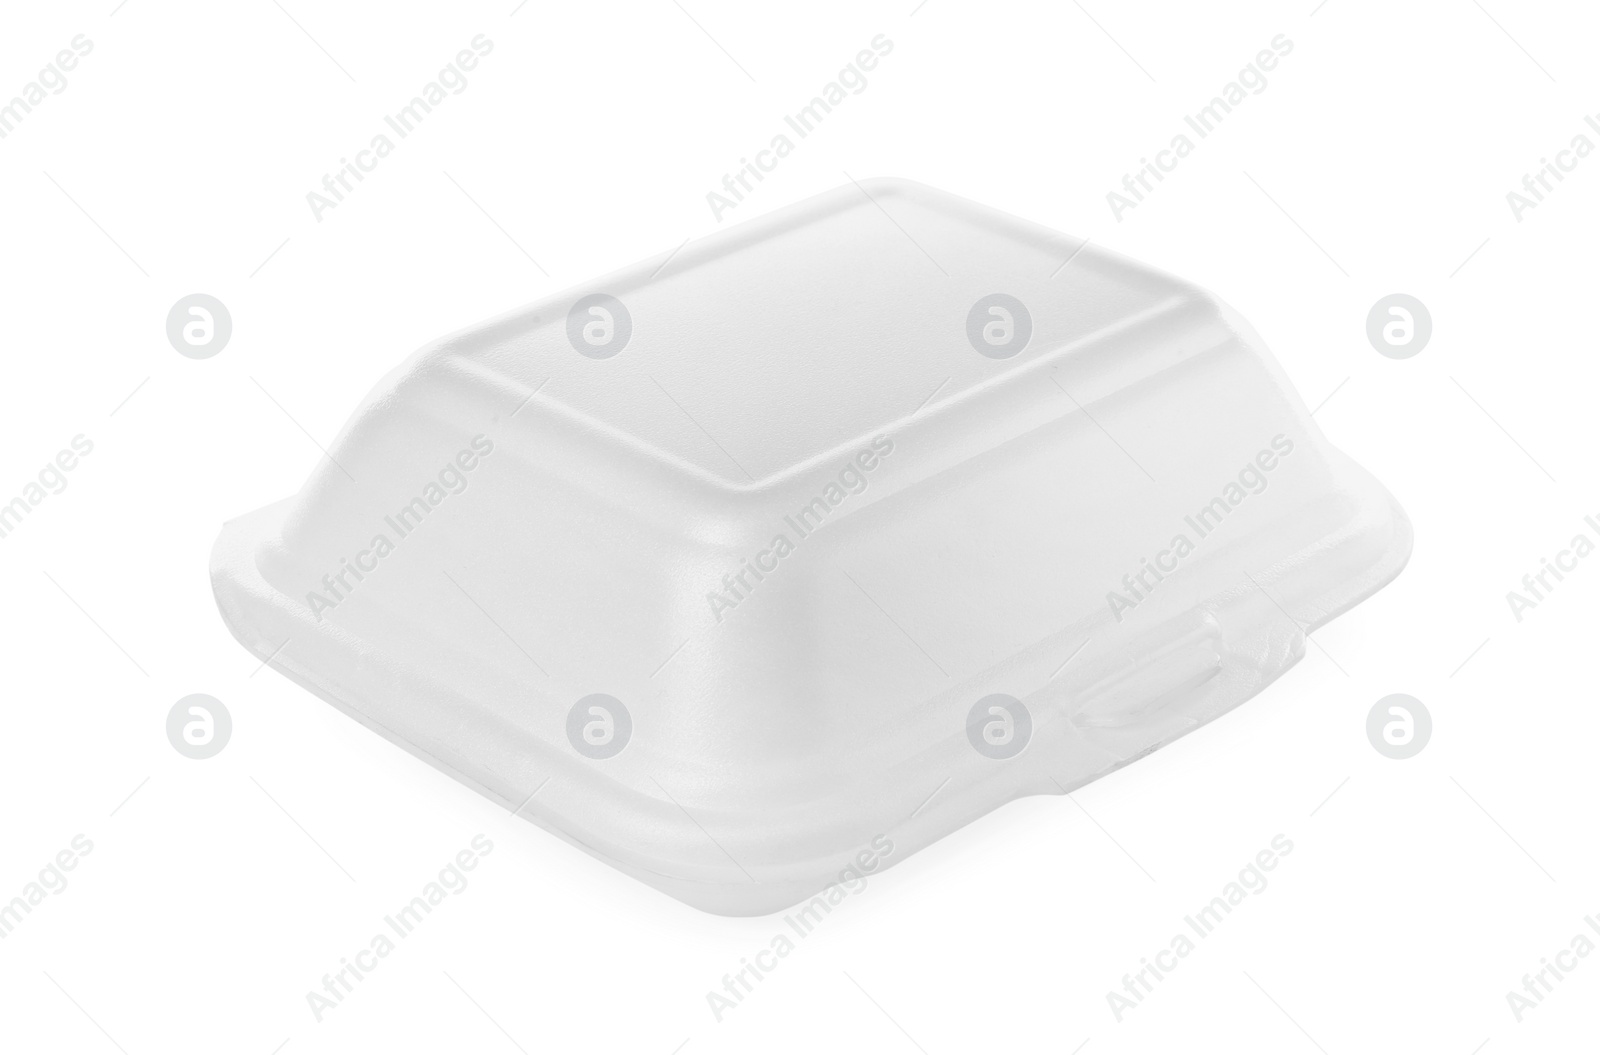 Photo of Disposable plastic lunch box isolated on white